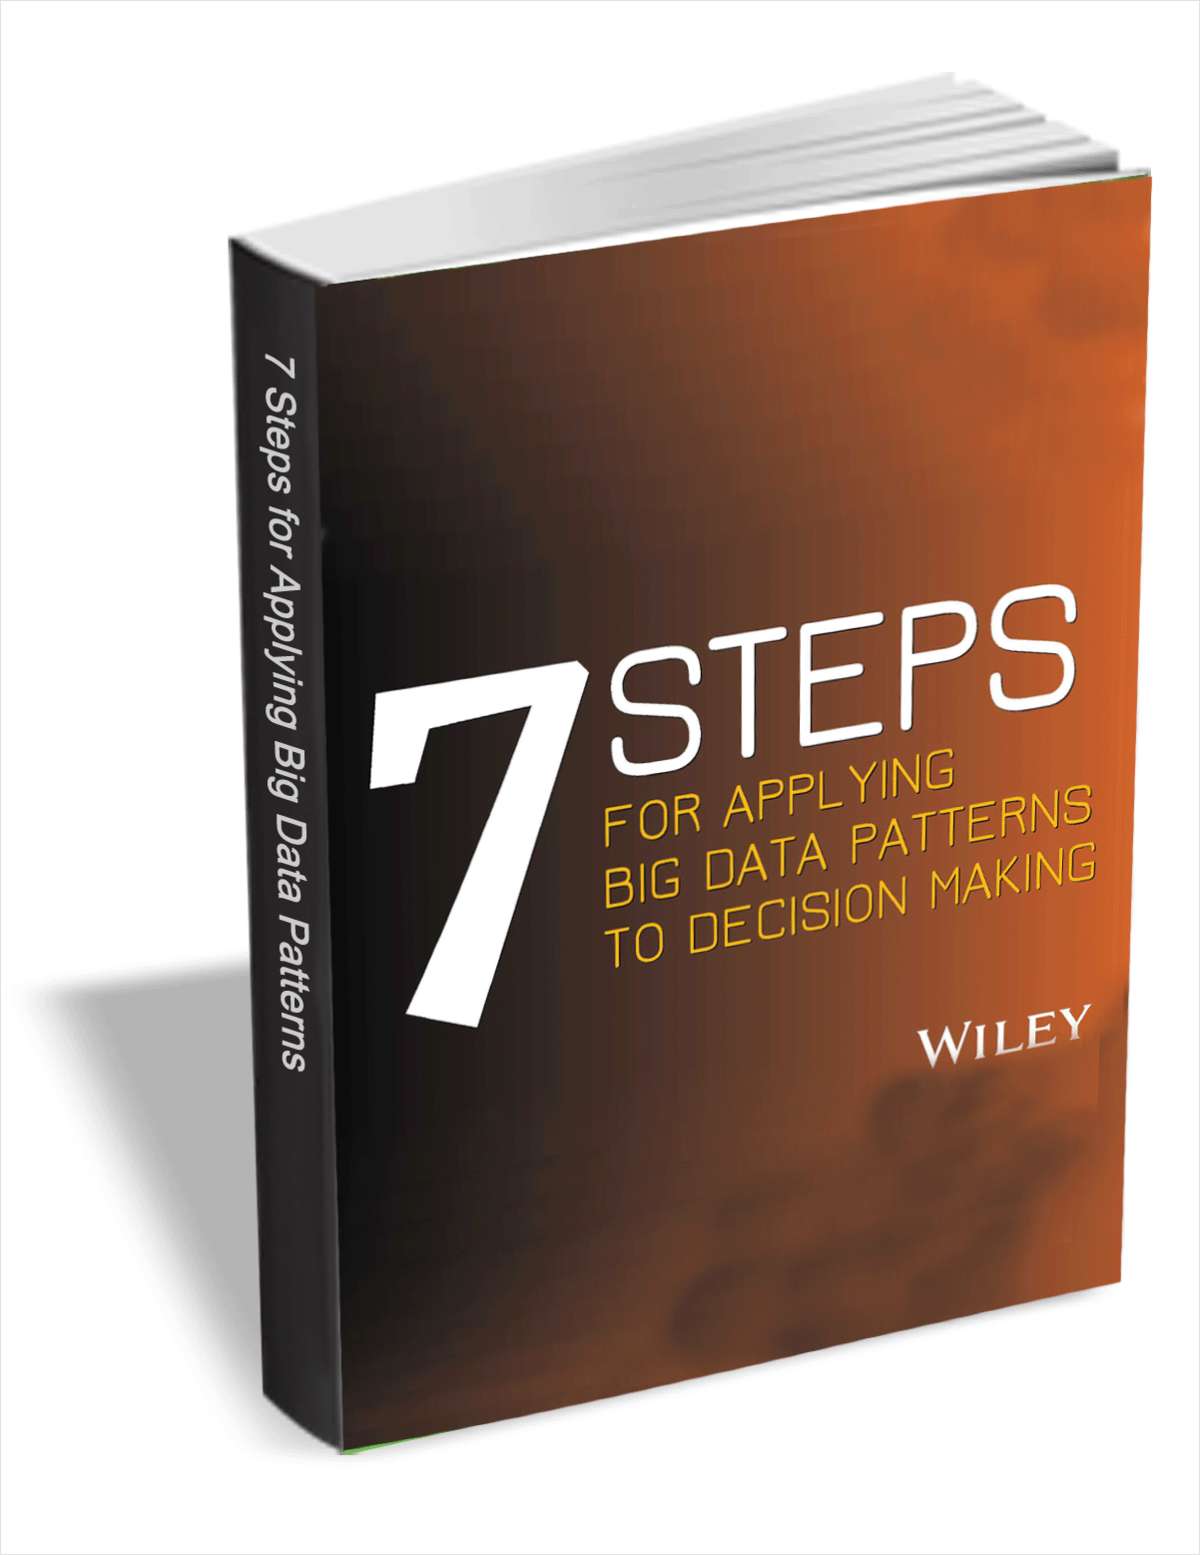 7 Steps for Applying Big Data Patterns to Decision Making